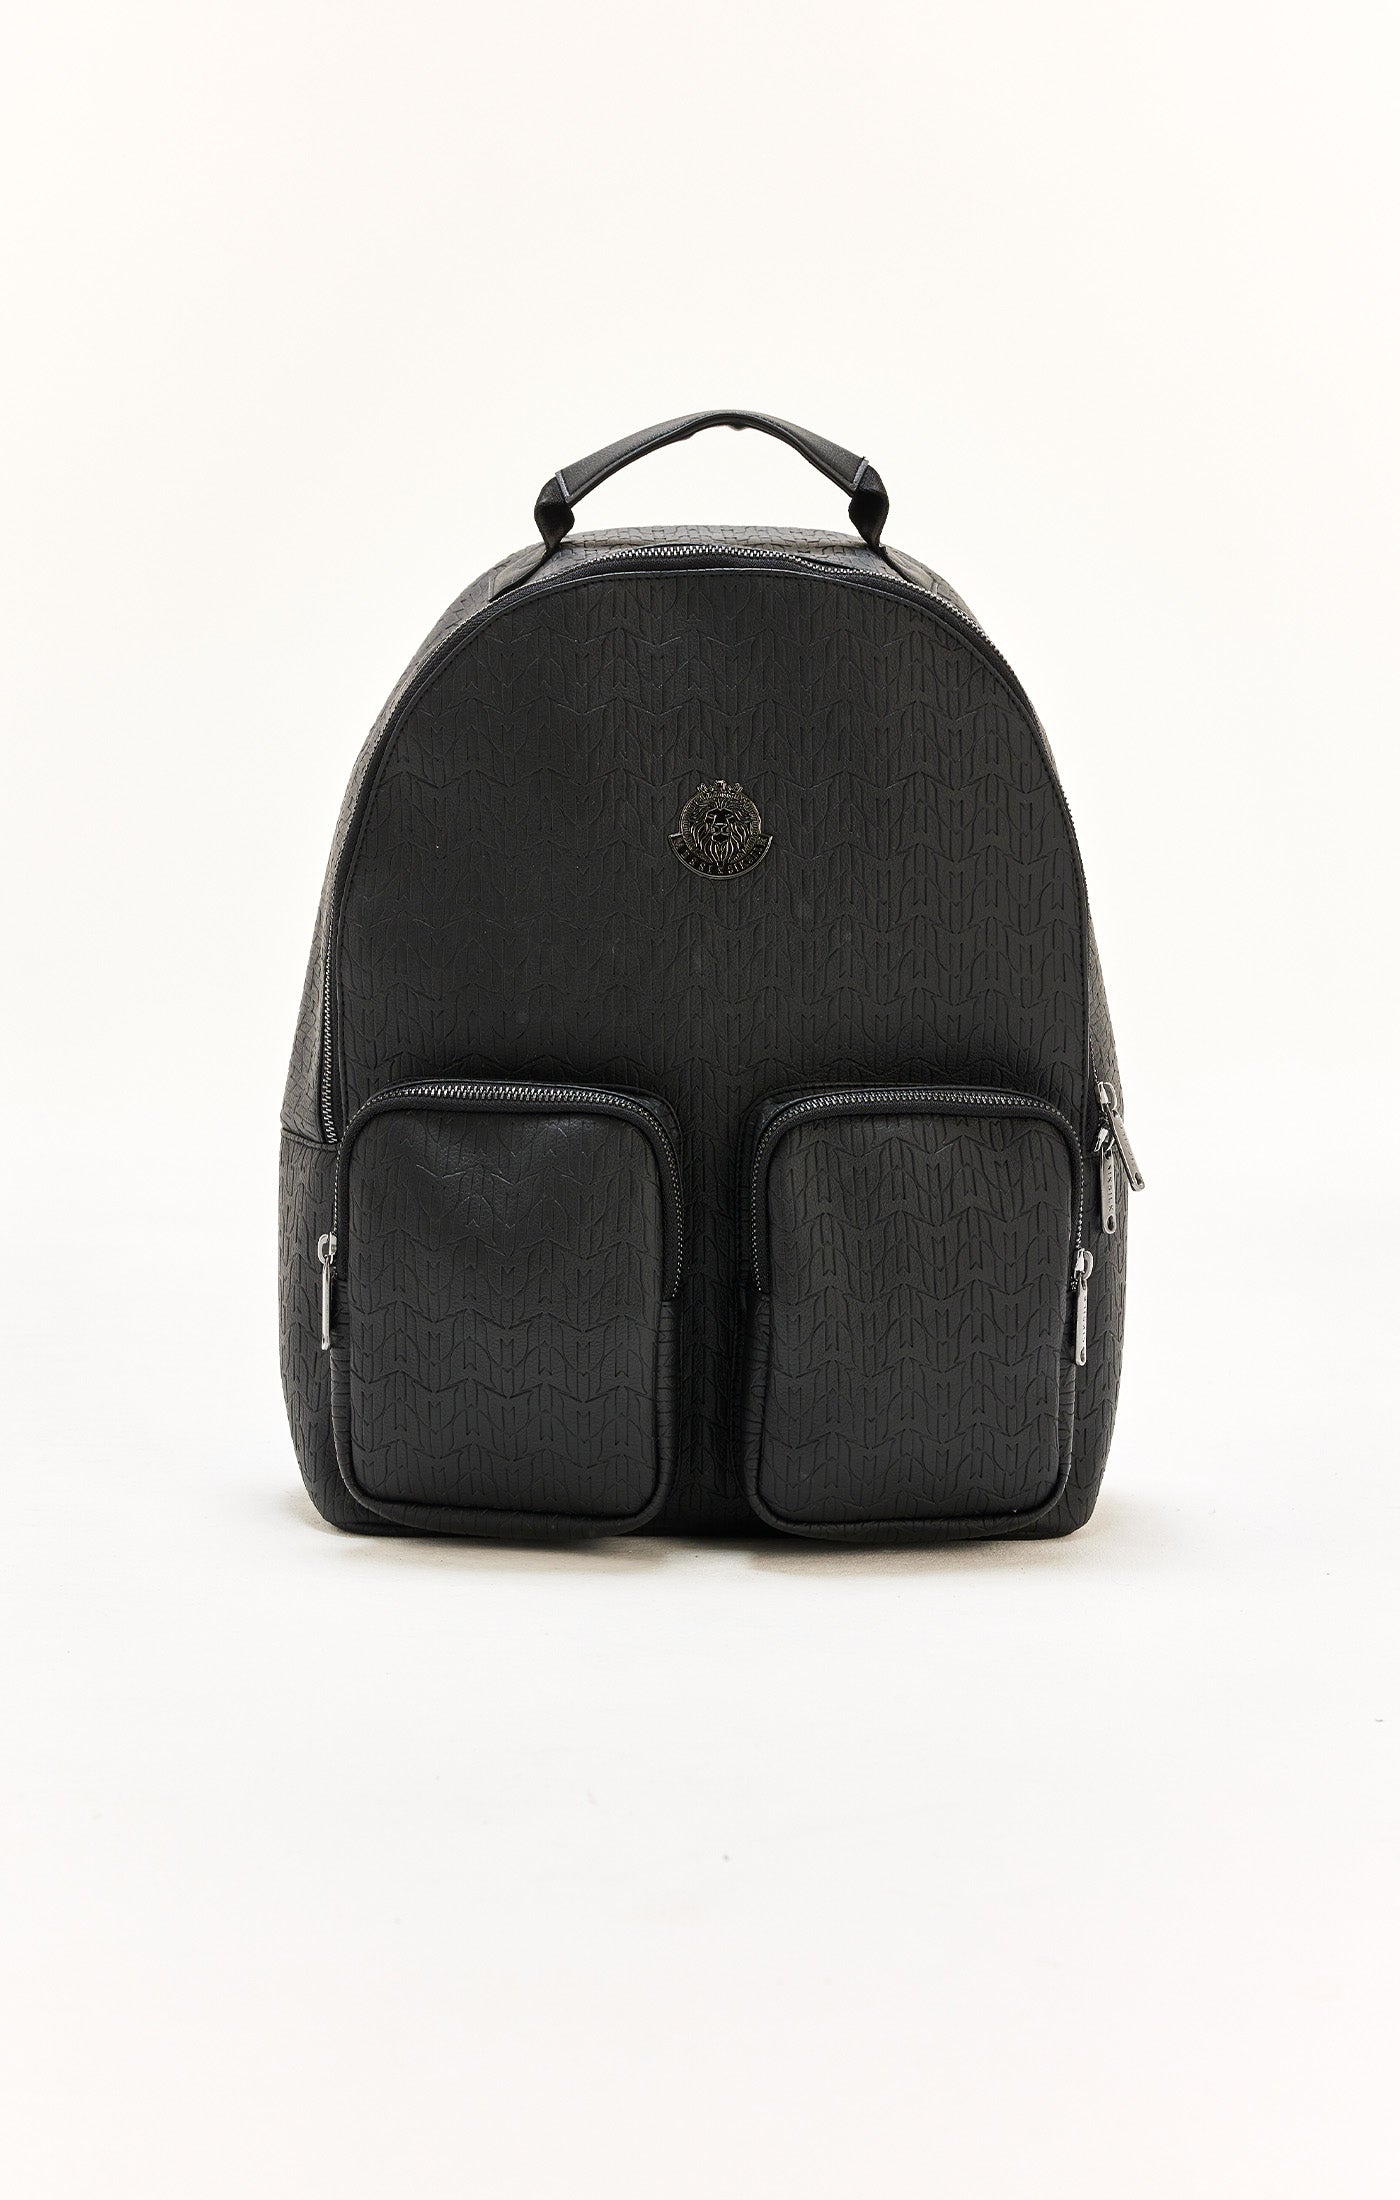 Load image into Gallery viewer, Messi x SikSilk Black Pu Branded Rucksack (1)